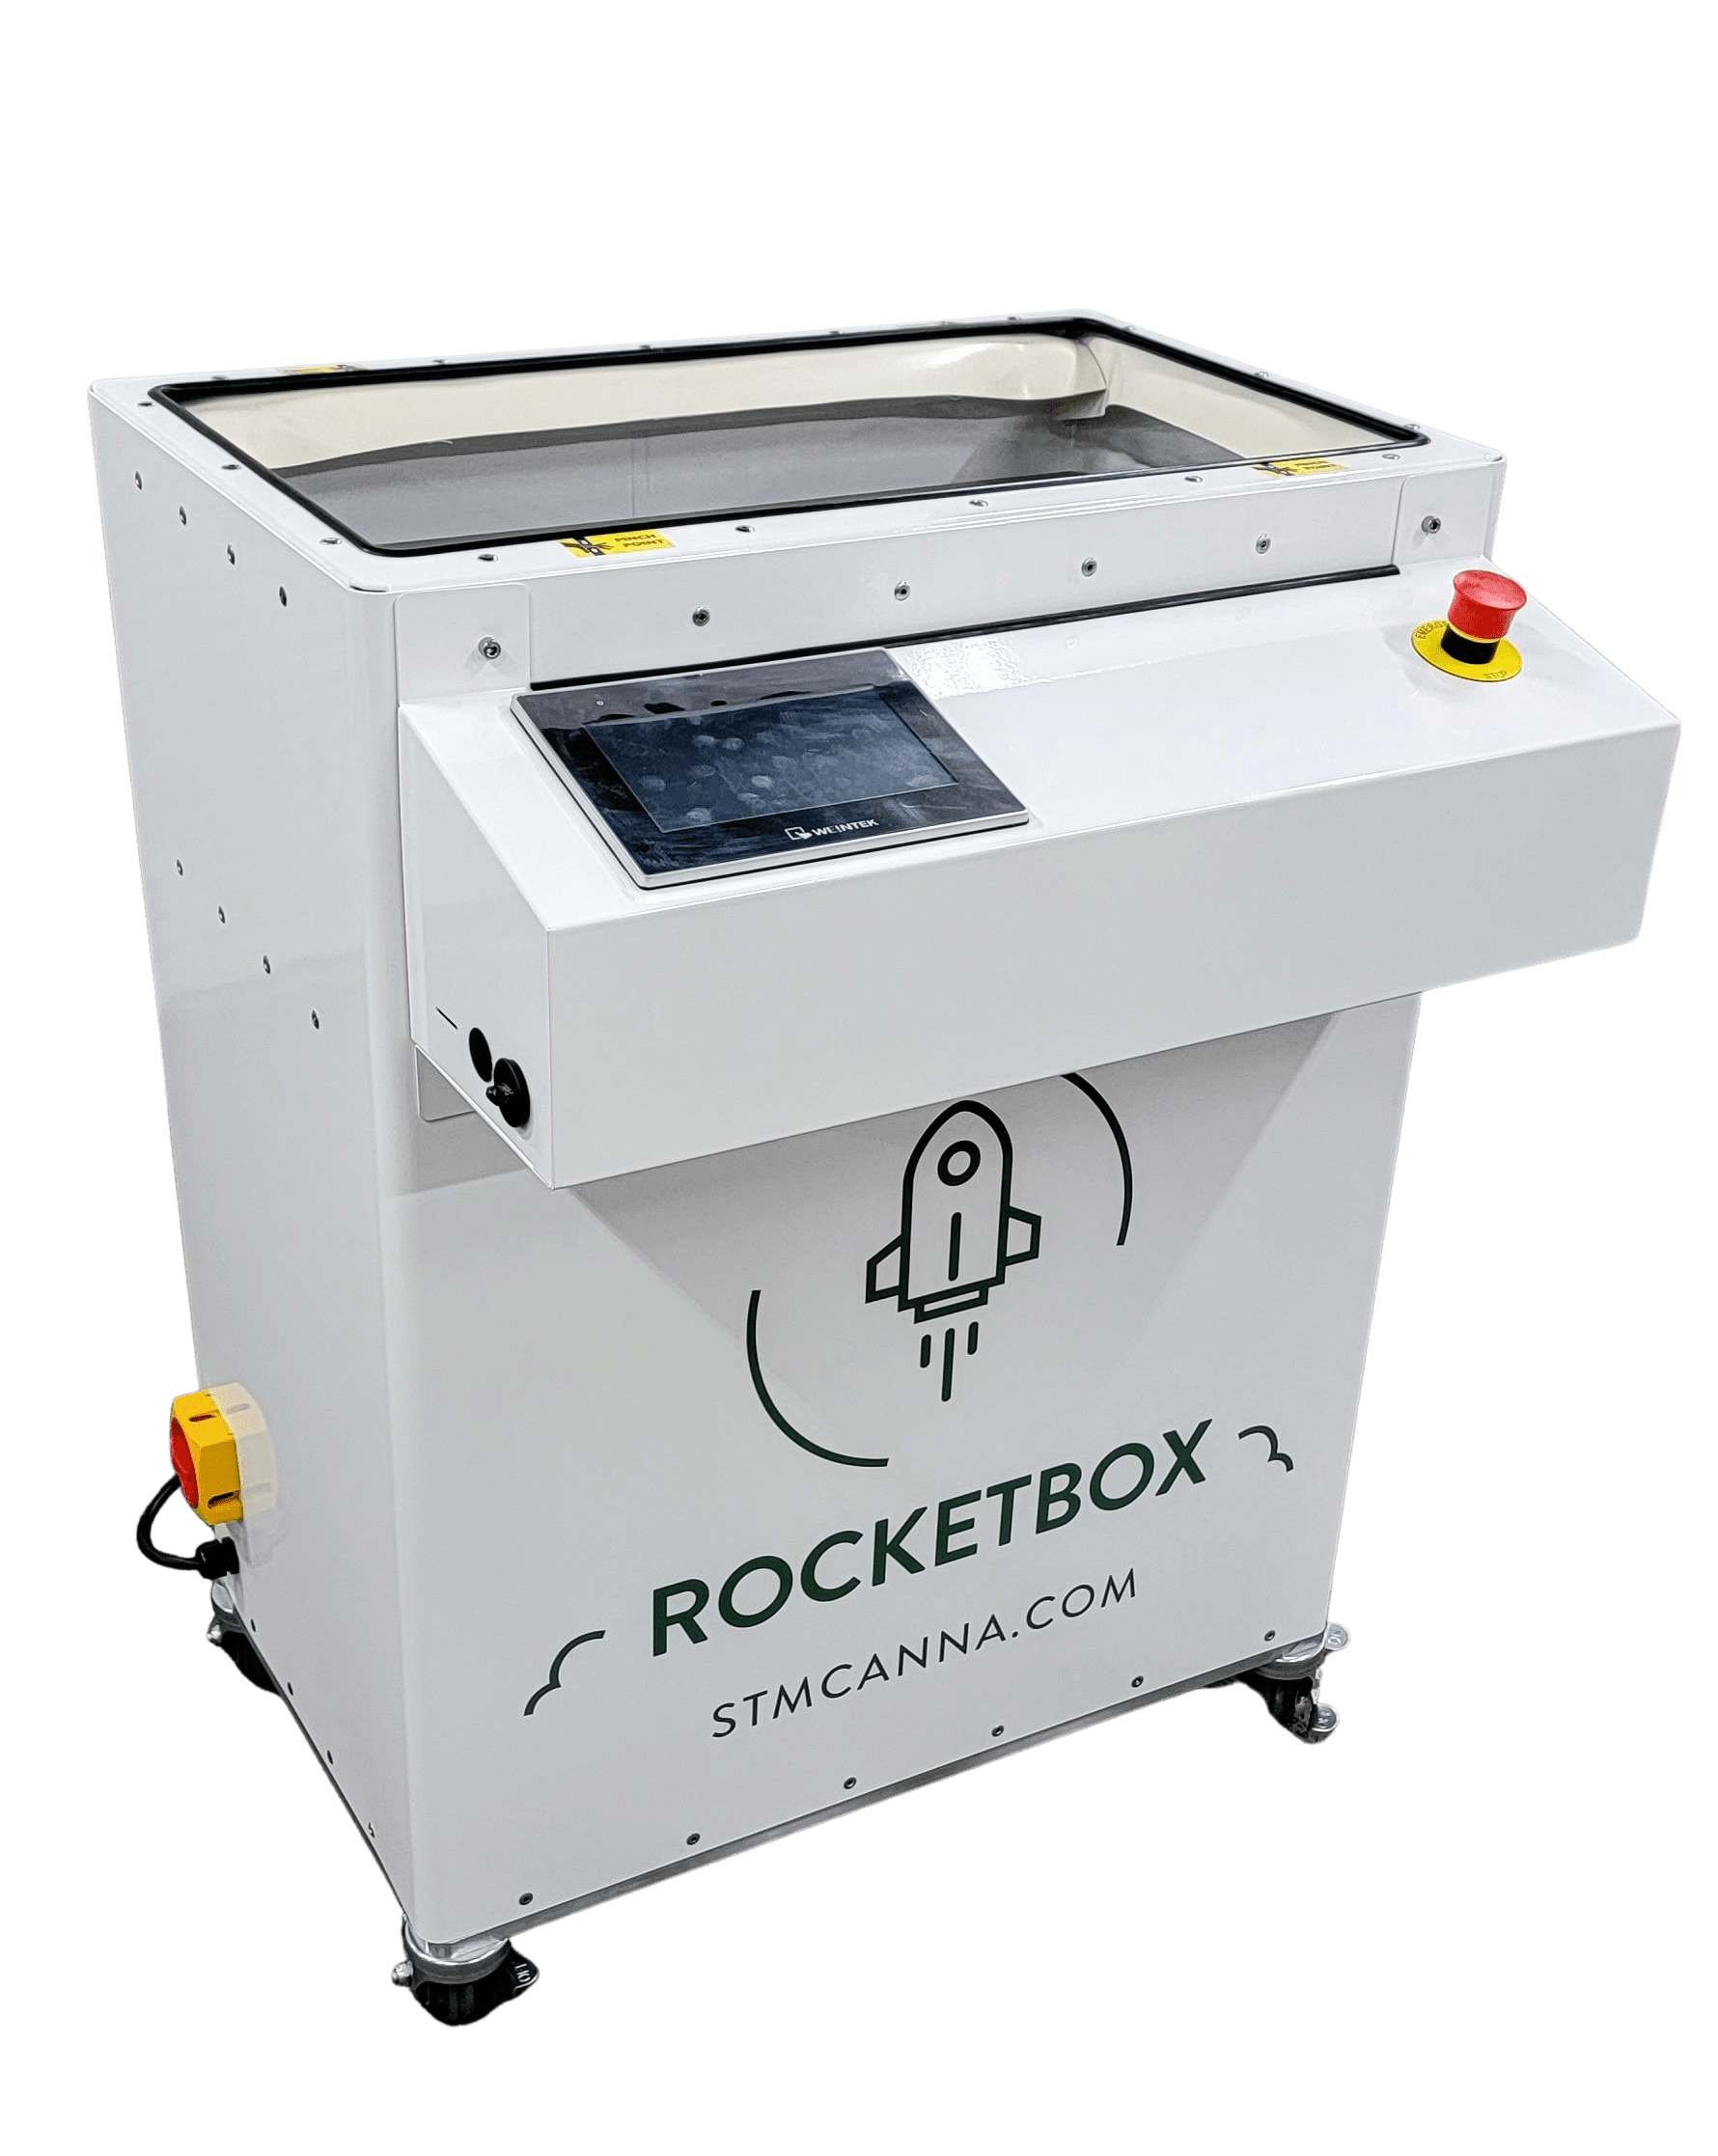 The RocketBox commercial pre-roll machine is designed with durability in mind and is engineered with industrial grade components and food grade materials.